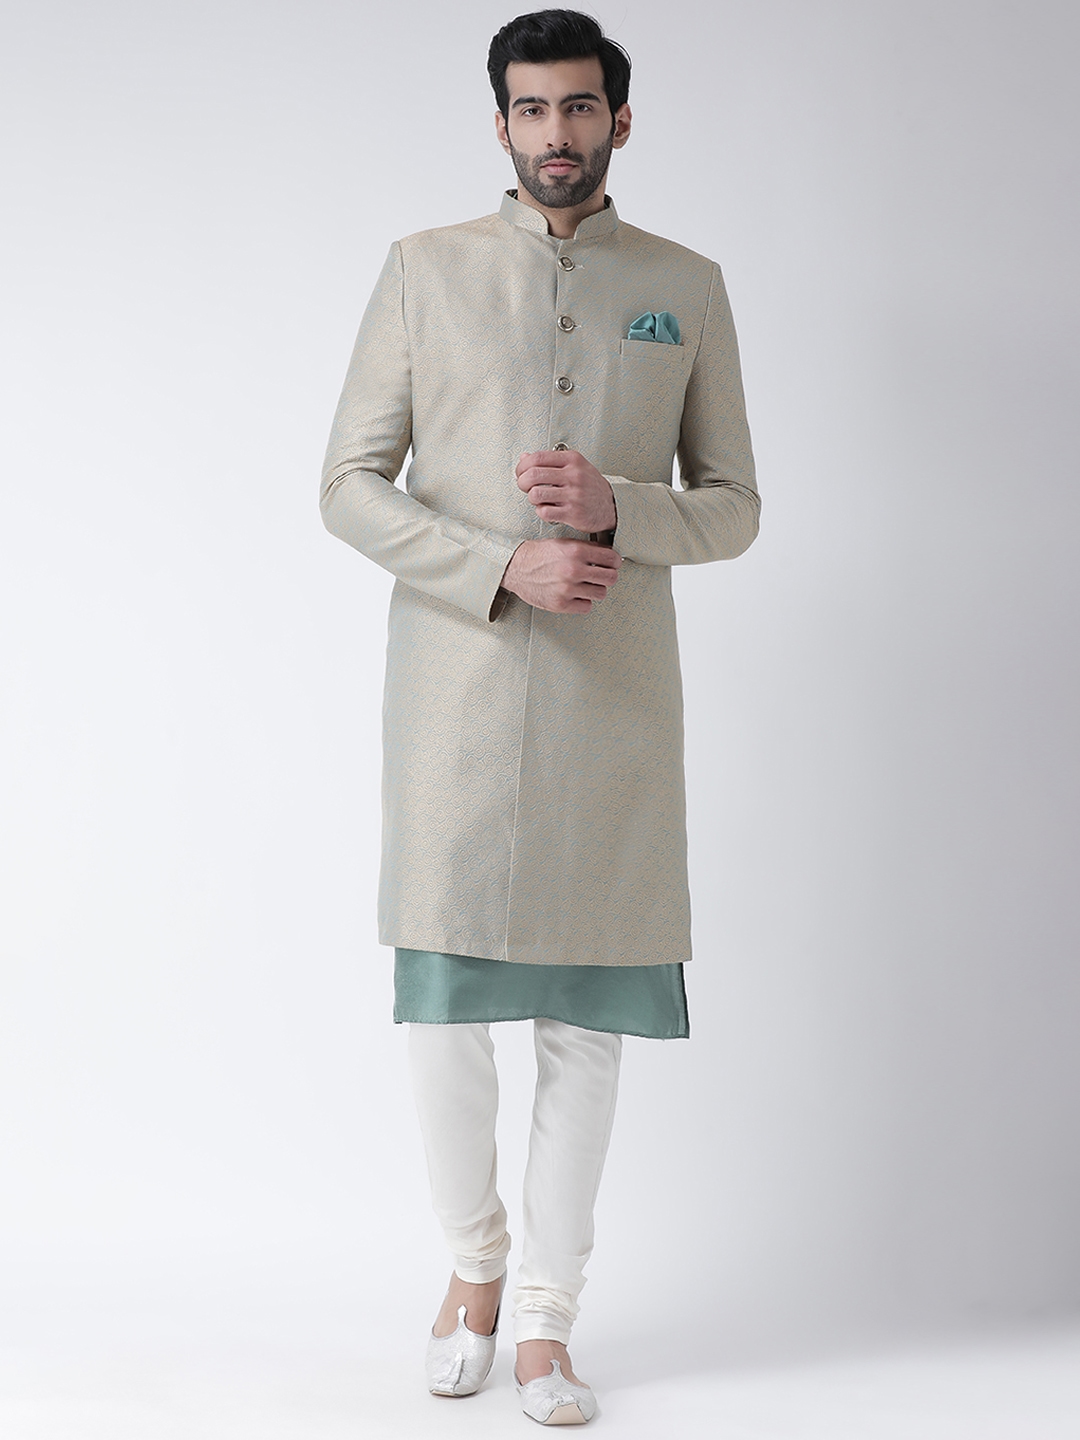 The Ultimate Collection of 999+ Sherwani Images in Stunning 4K Quality